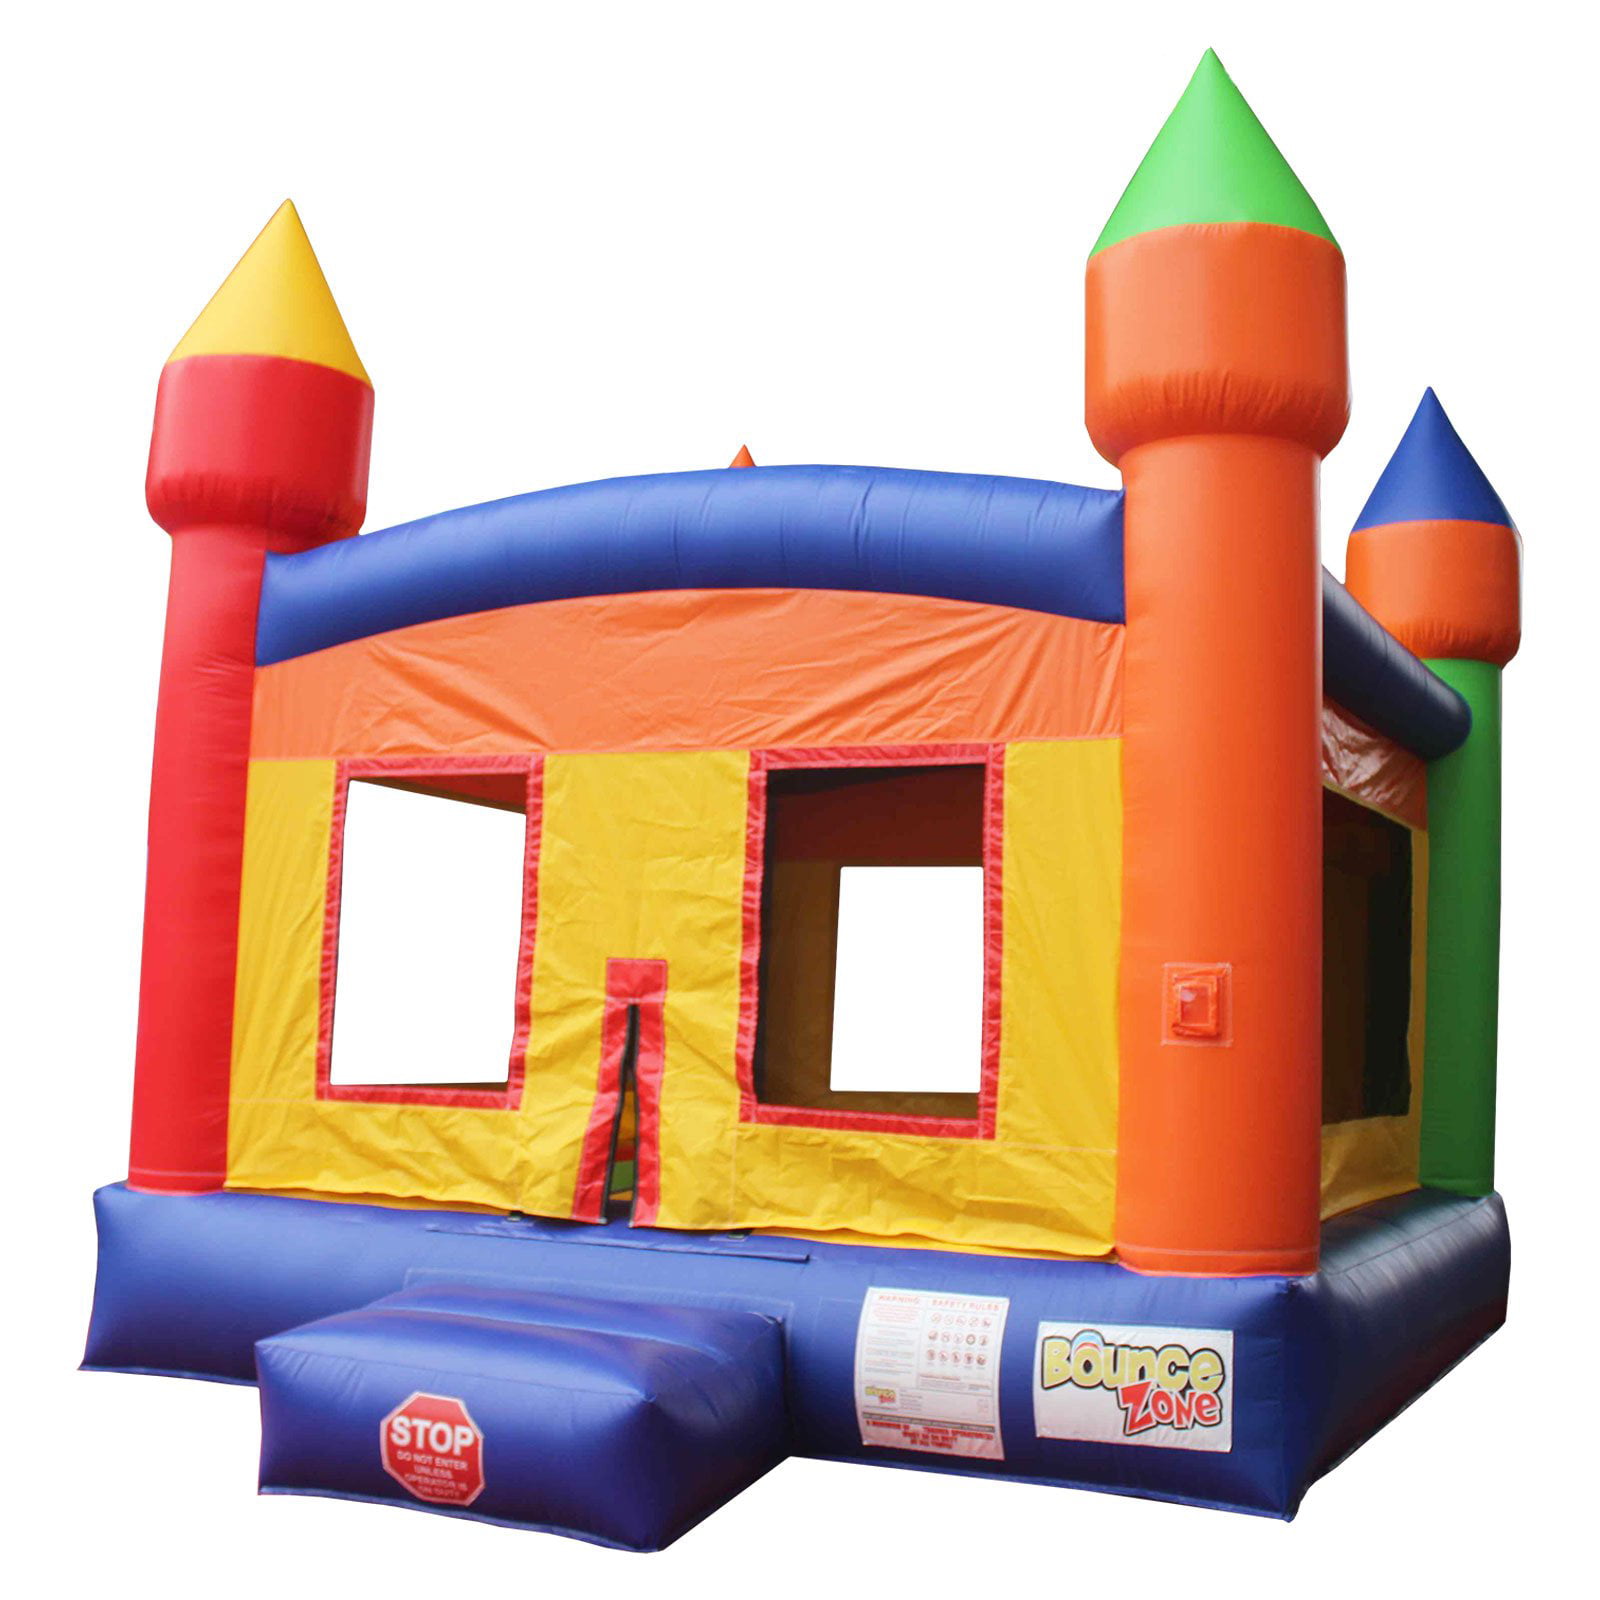 Jumpers for Sale and Commercial Inflatable Bounce Houses for Sale